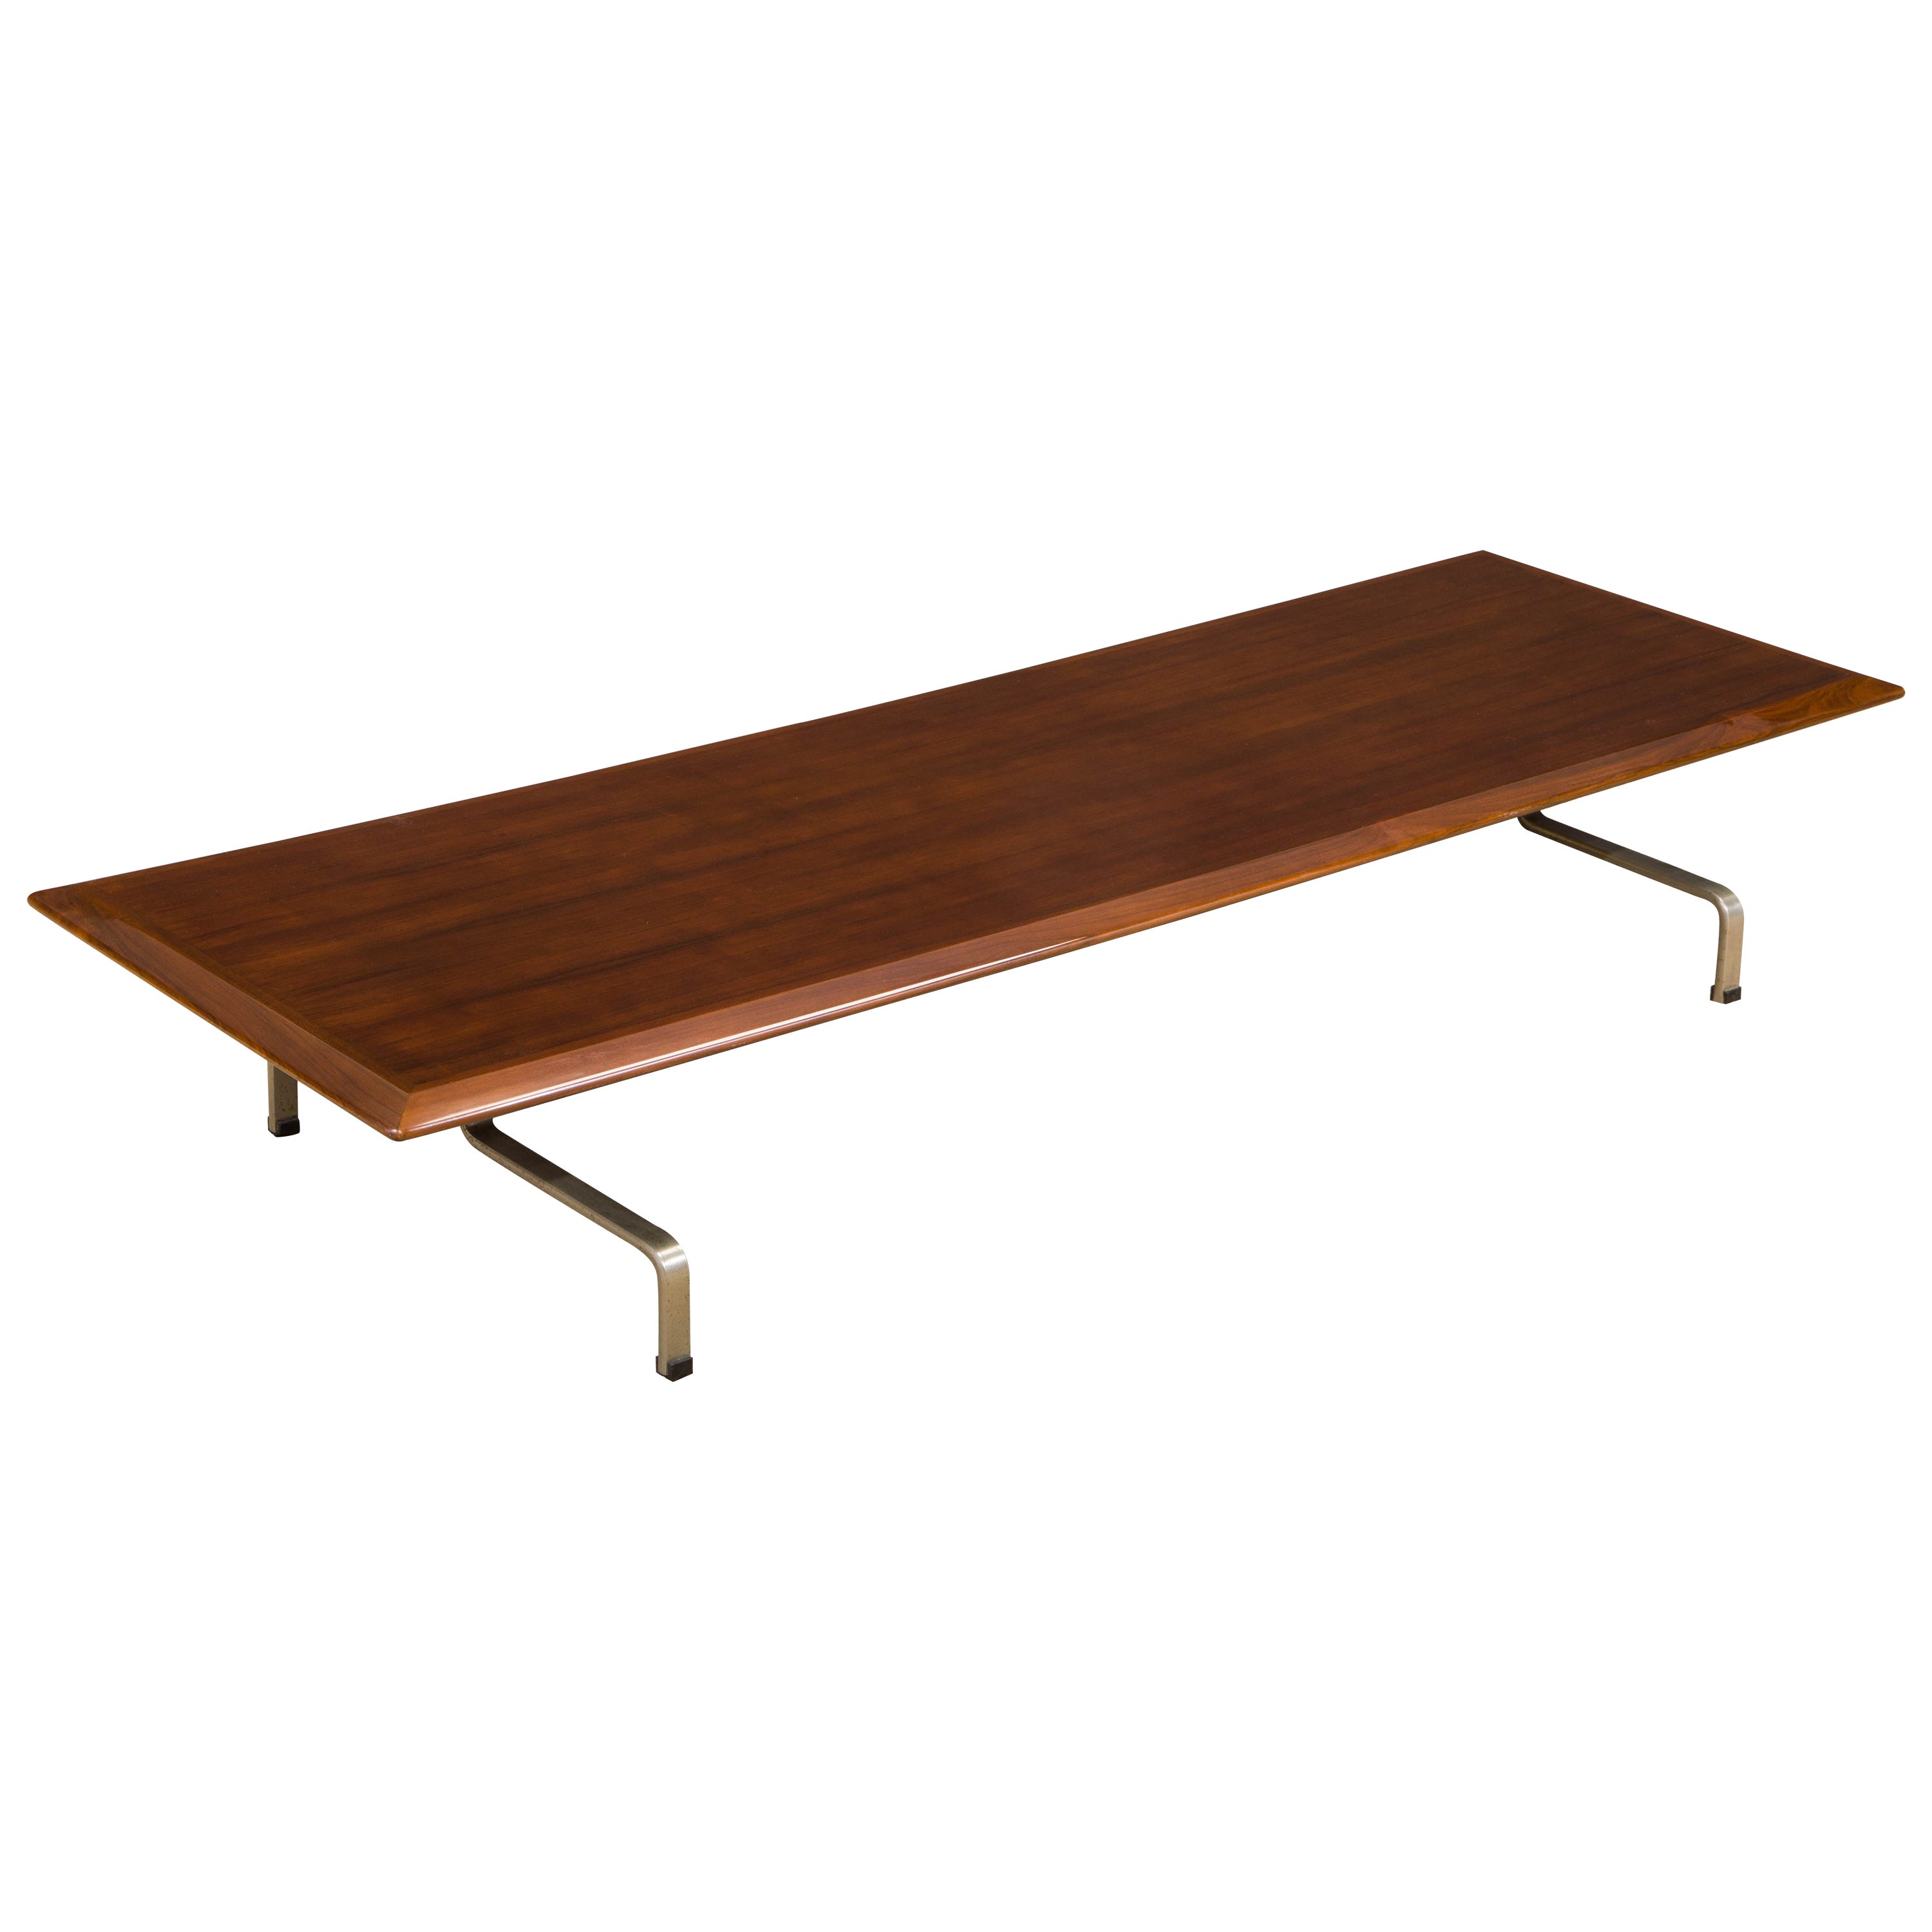 Poul Kjaerholm PK-31 Coffee Table with Rosewood Top, Rare